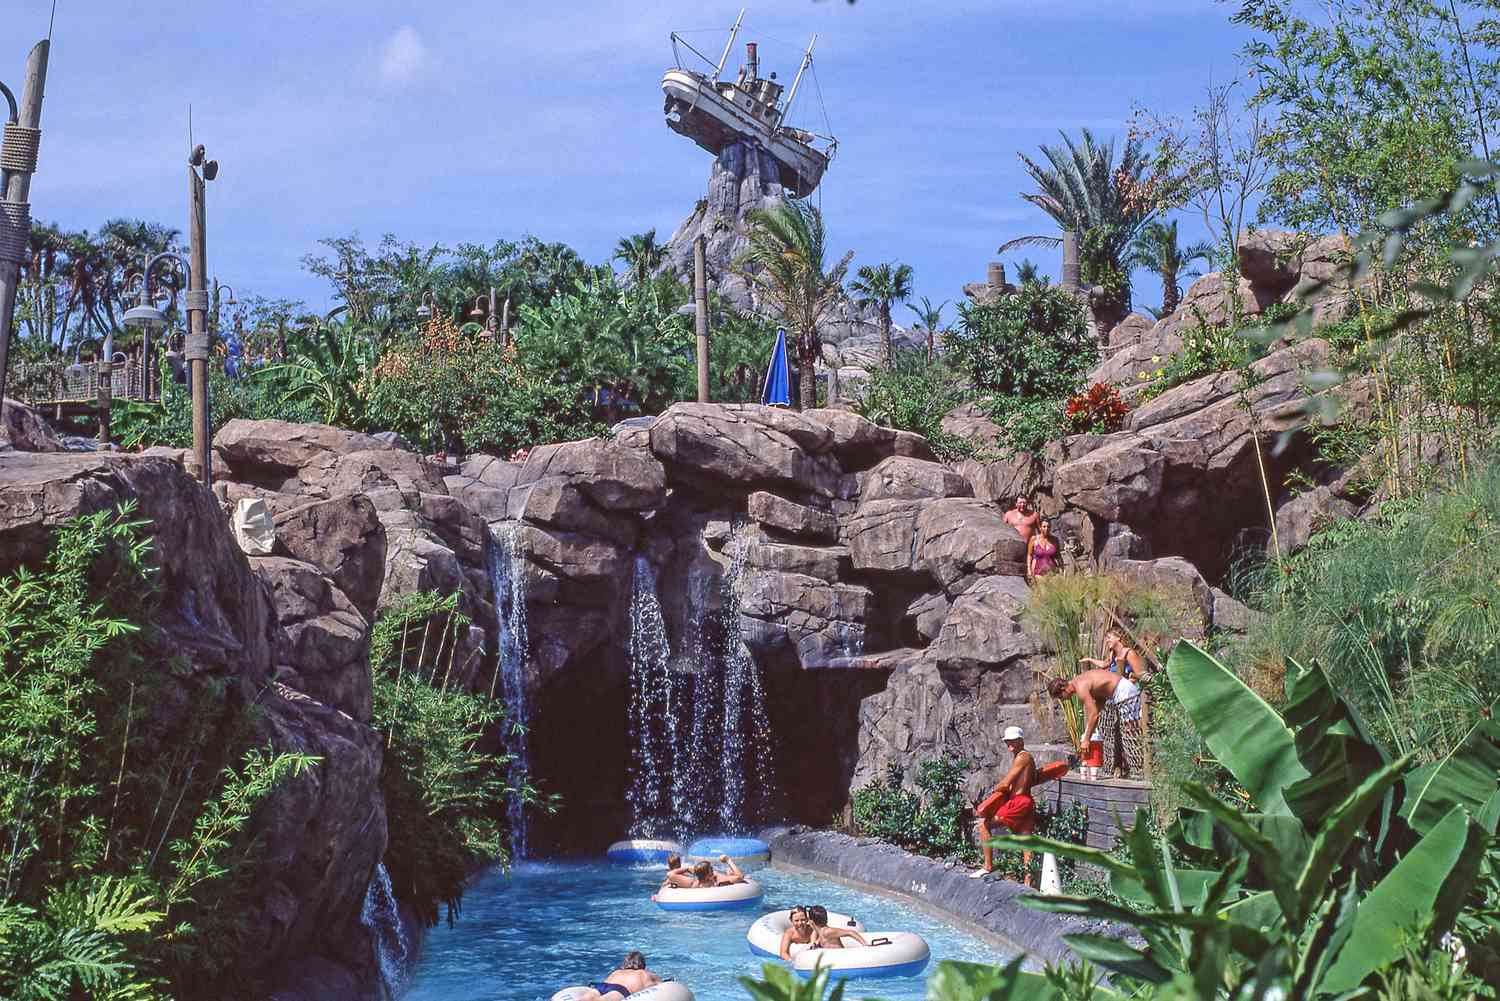 Say What Now? Woman Sues Disney Over ‘Painful Wedgie’ and ‘Vaginal Lacerations’ After Riding Waterslide